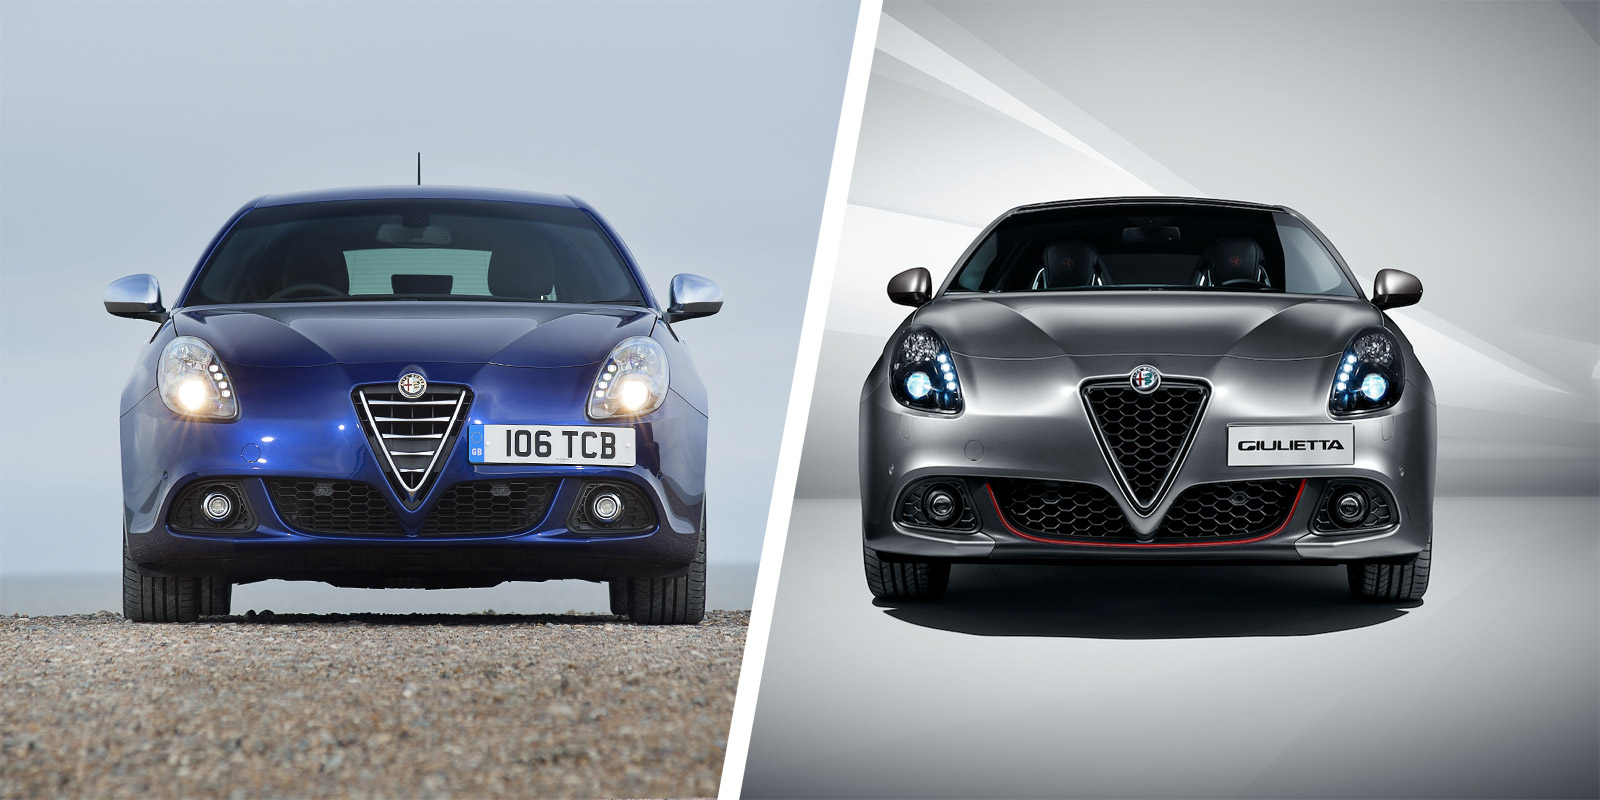 Vælge Creek Med andre band Alfa Romeo Giulietta facelift: old vs new | carwow